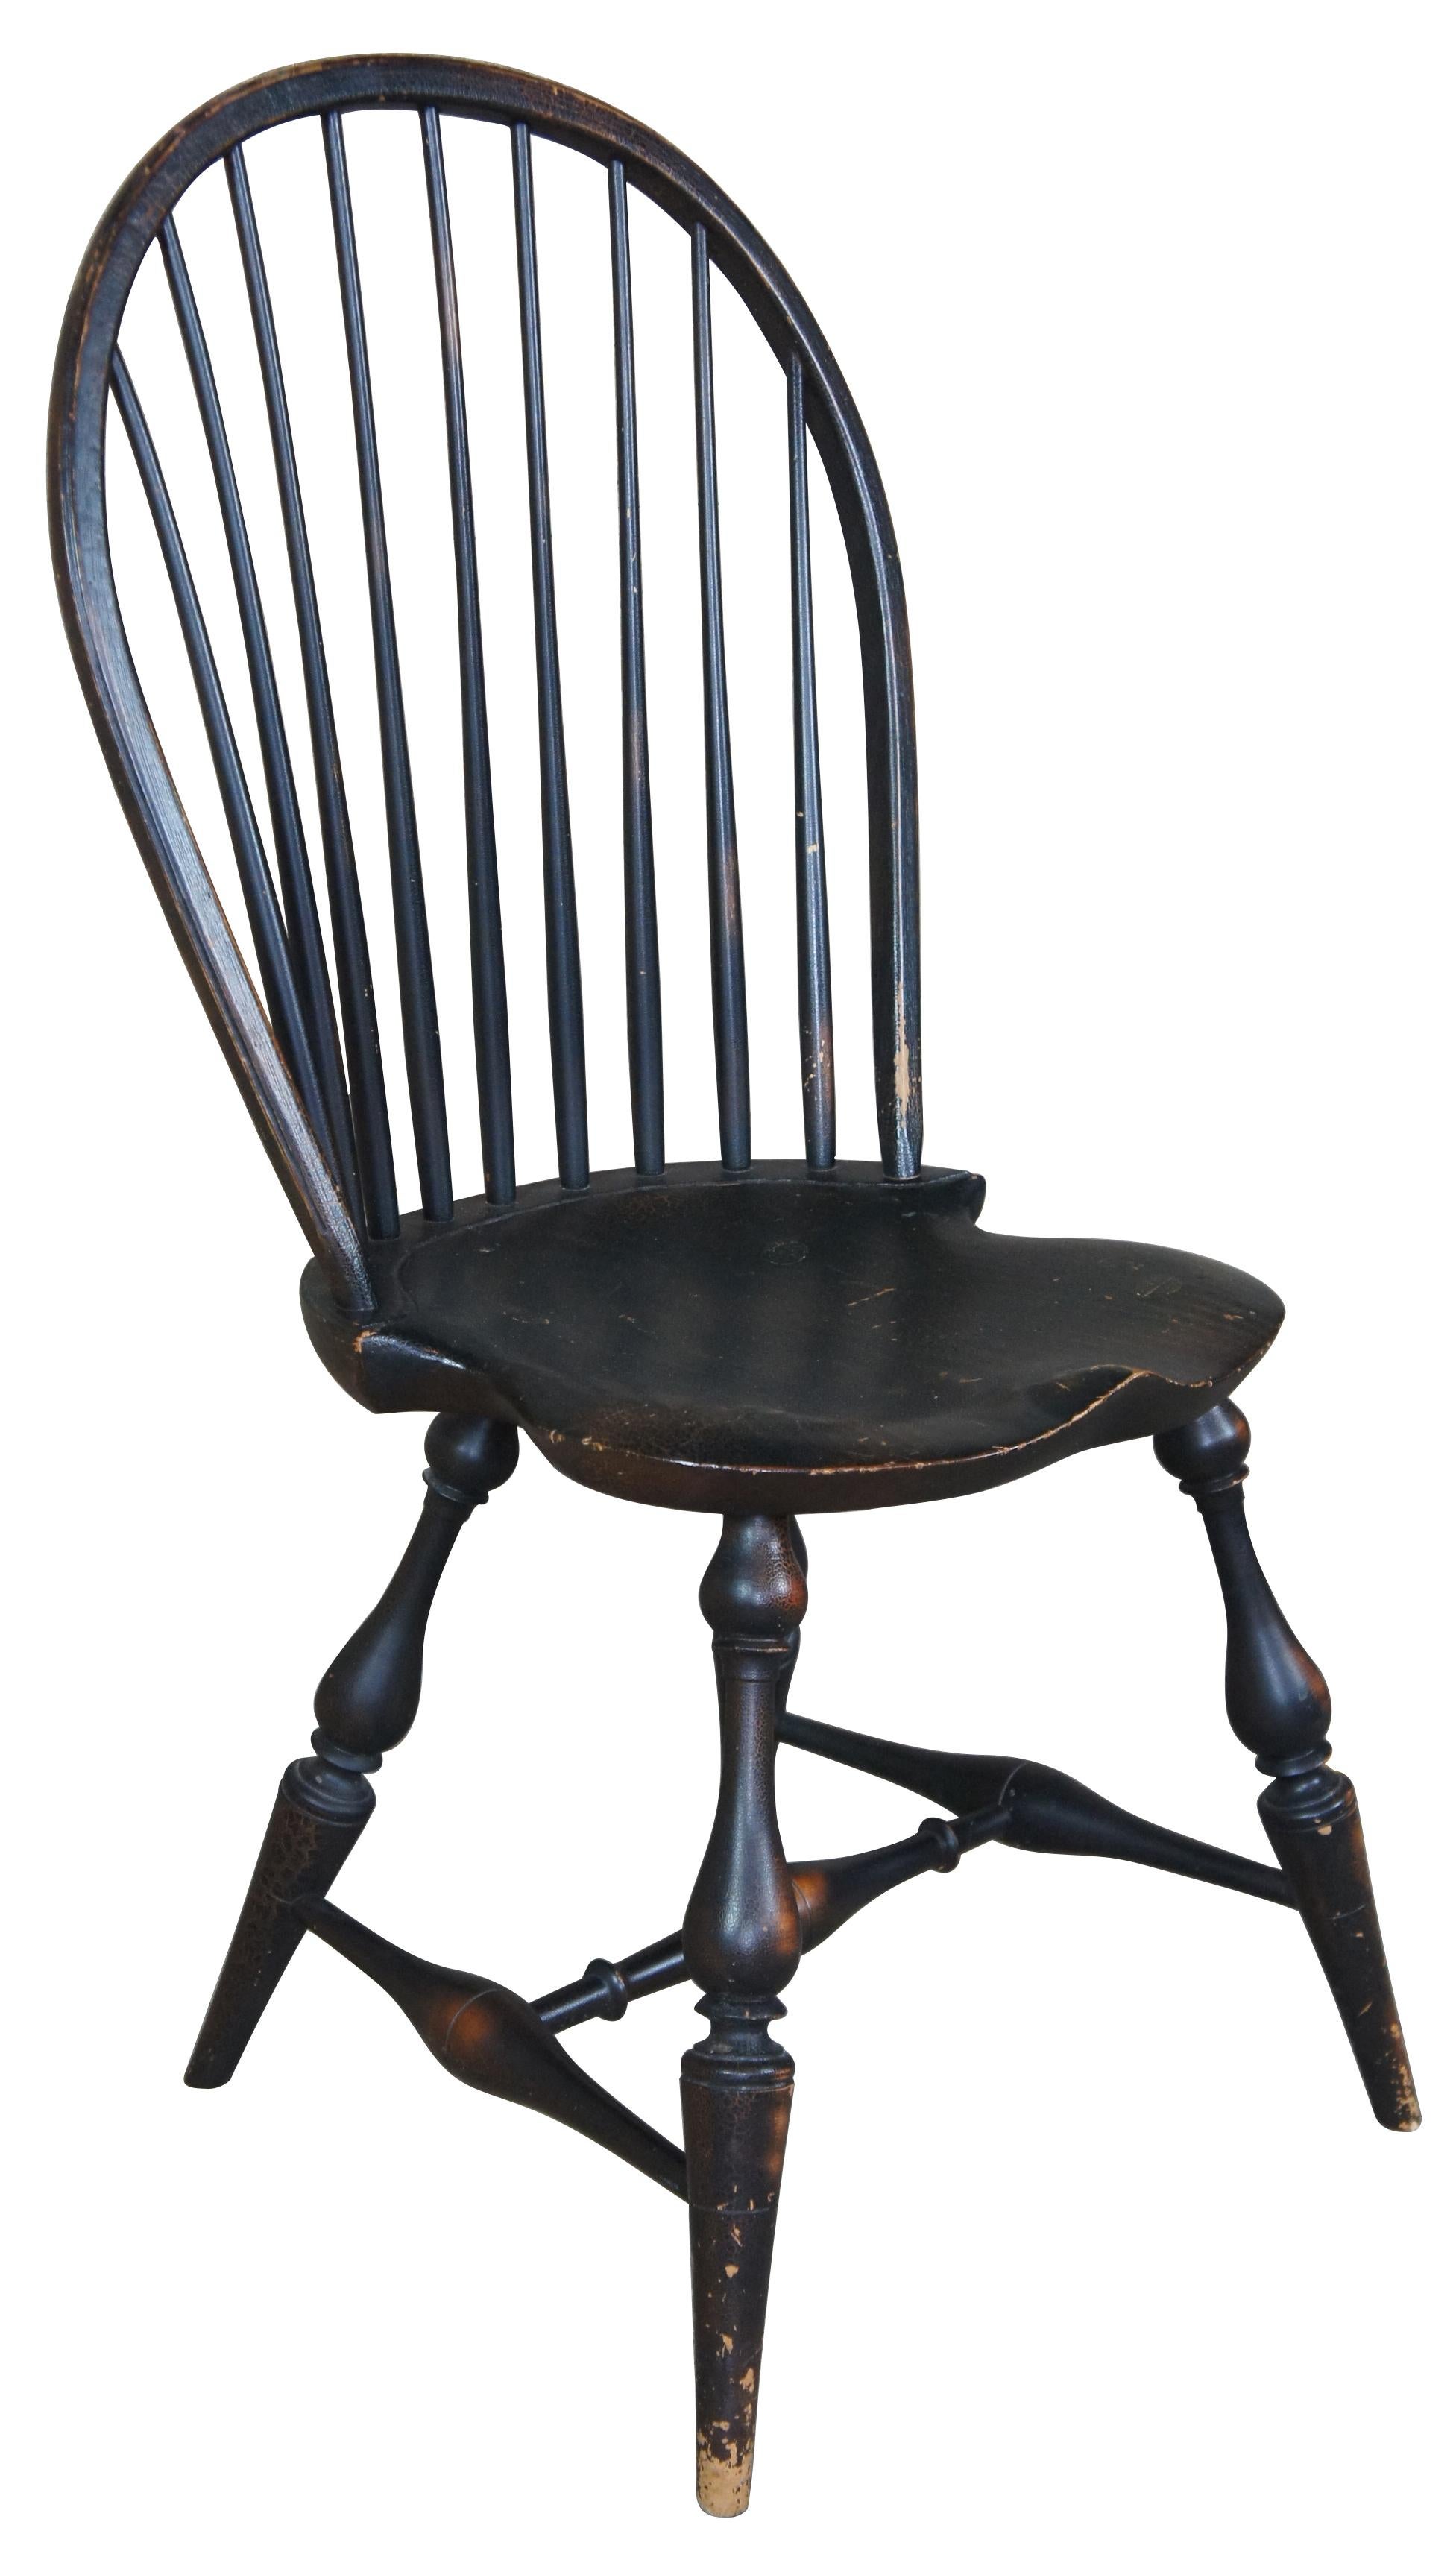 Late 20th century bow back Windsor chair by River bend Chair Co. Features a black crackle finish with vase shaped legs.
    